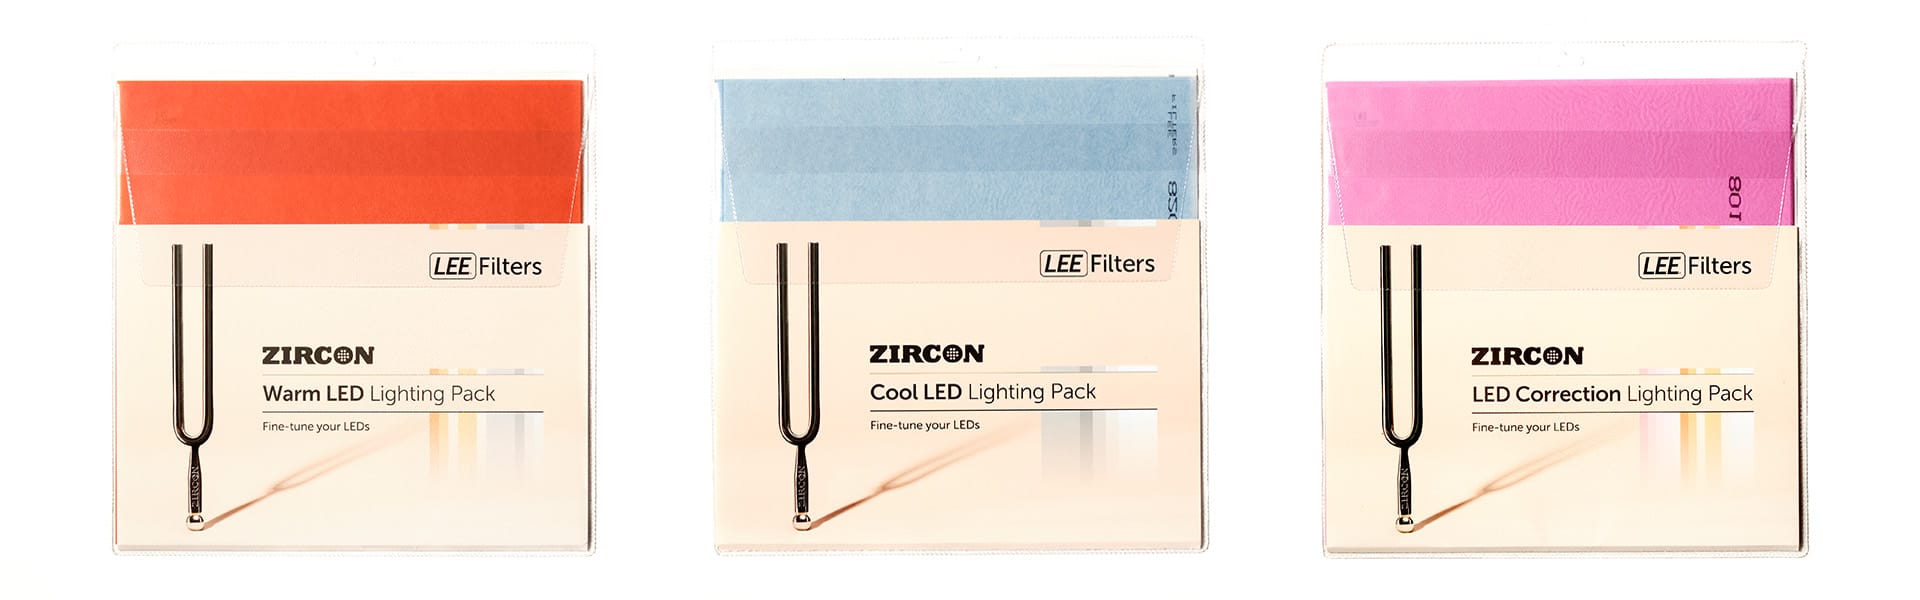 Zircon Filters - LED Light Filters - LEE Filters